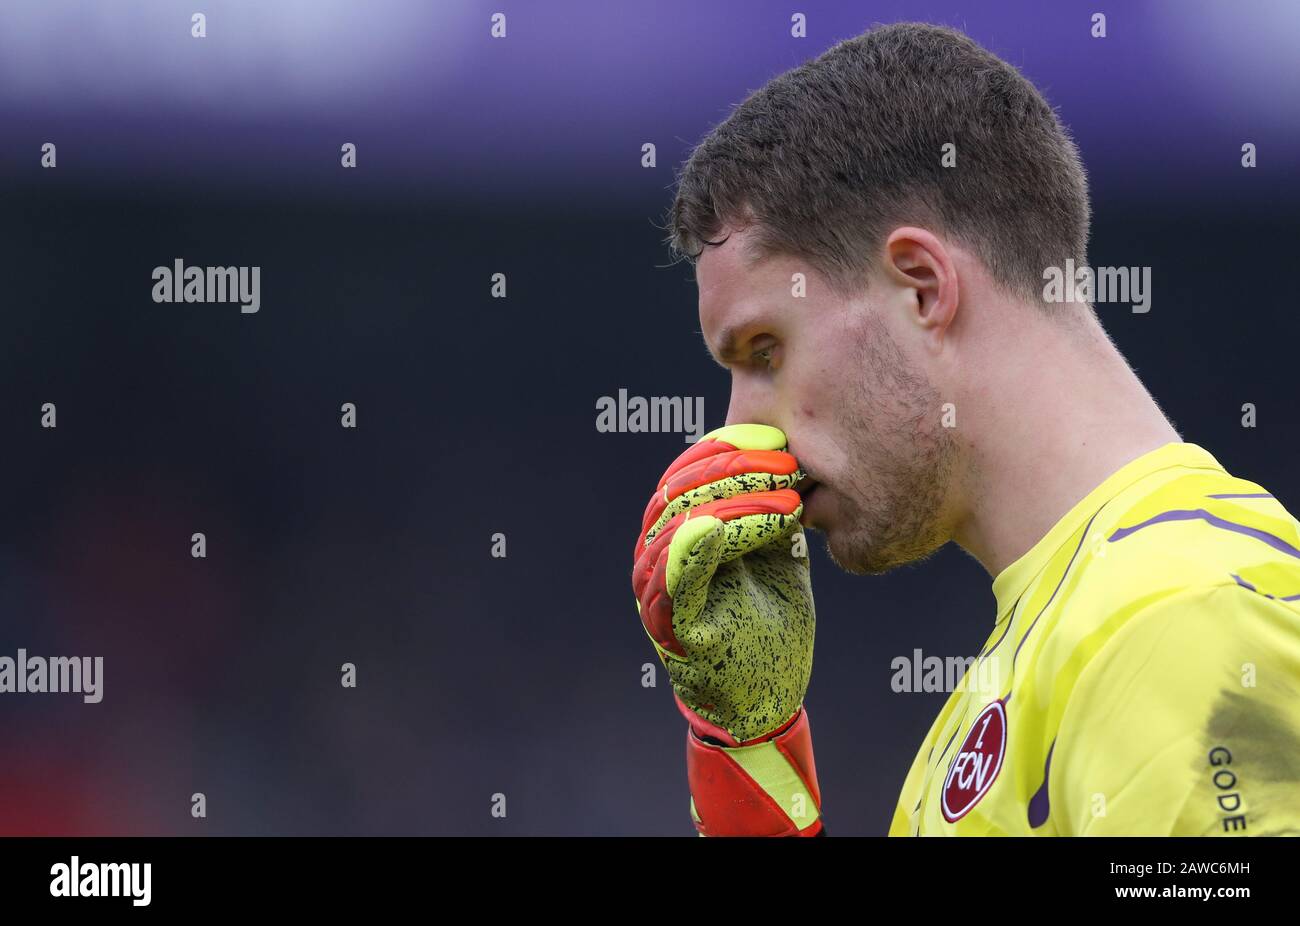 08 February 2020, Lower Saxony, Osnabrück: Football: 2nd Bundesliga, VfL Osnabrück - 1 FC Nürnberg, 21st matchday in the stadium at Bremer Brücke. Goalkeeper Christian Mathenia from Nuremberg grabs his nose. Photo: Friso Gentsch/dpa - IMPORTANT NOTE: In accordance with the regulations of the DFL Deutsche Fußball Liga and the DFB Deutscher Fußball-Bund, it is prohibited to exploit or have exploited in the stadium and/or from the game taken photographs in the form of sequence images and/or video-like photo series. Stock Photo